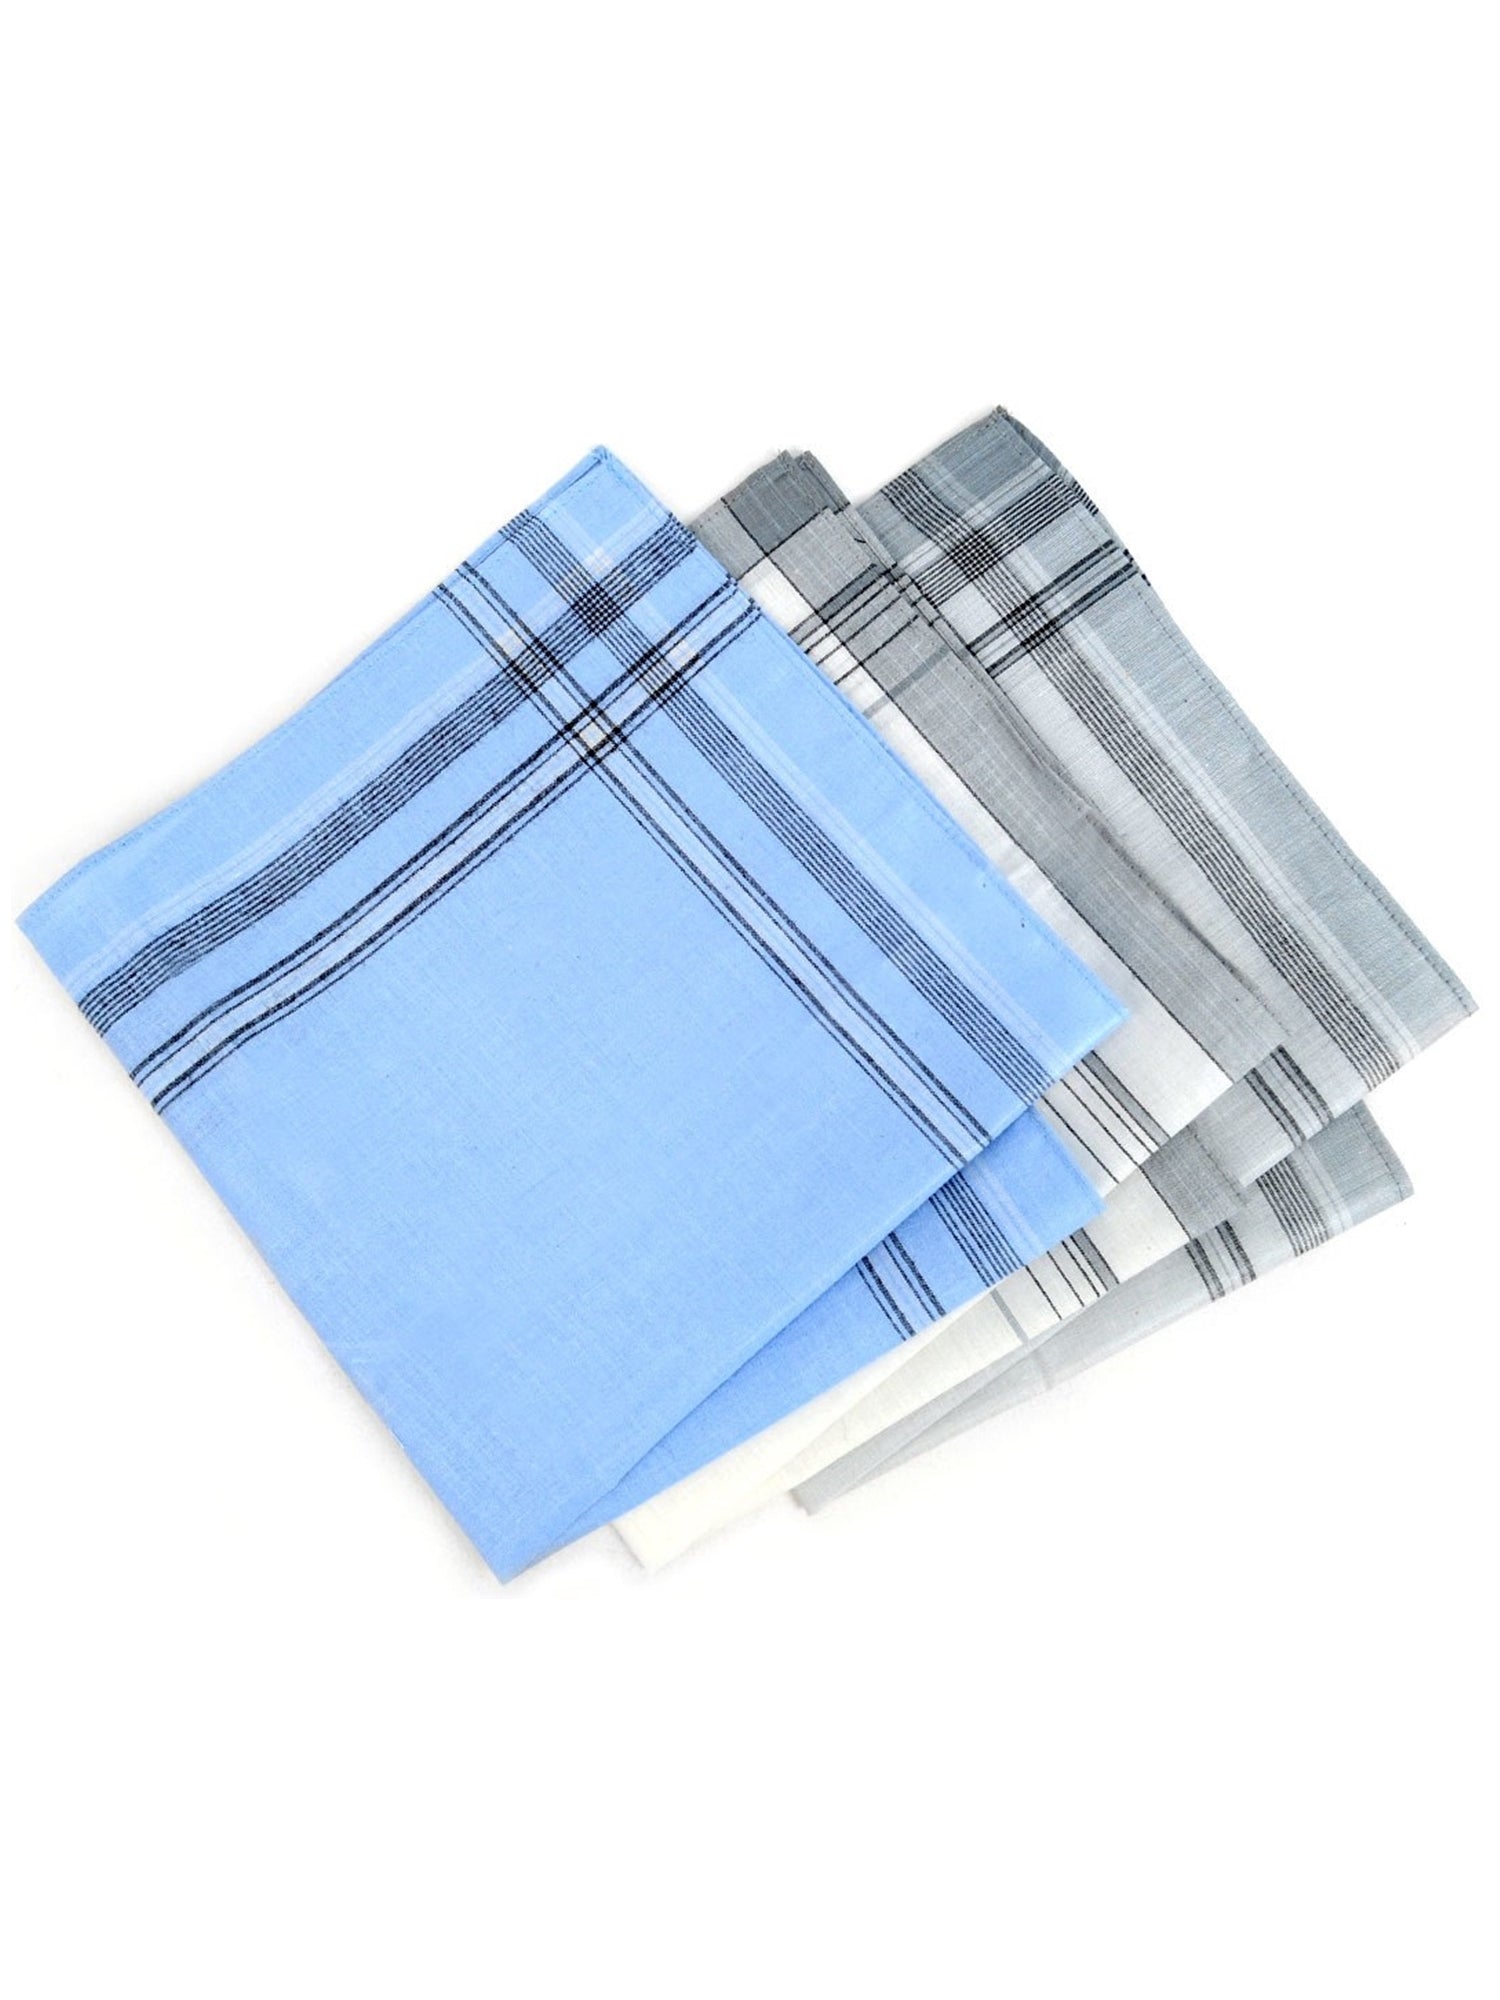 Men's White Cotton and Polyester Handkerchiefs Prefolded Pocket Squares TheDapperTie 6 Pieces - White, Blue & Gray Regular 